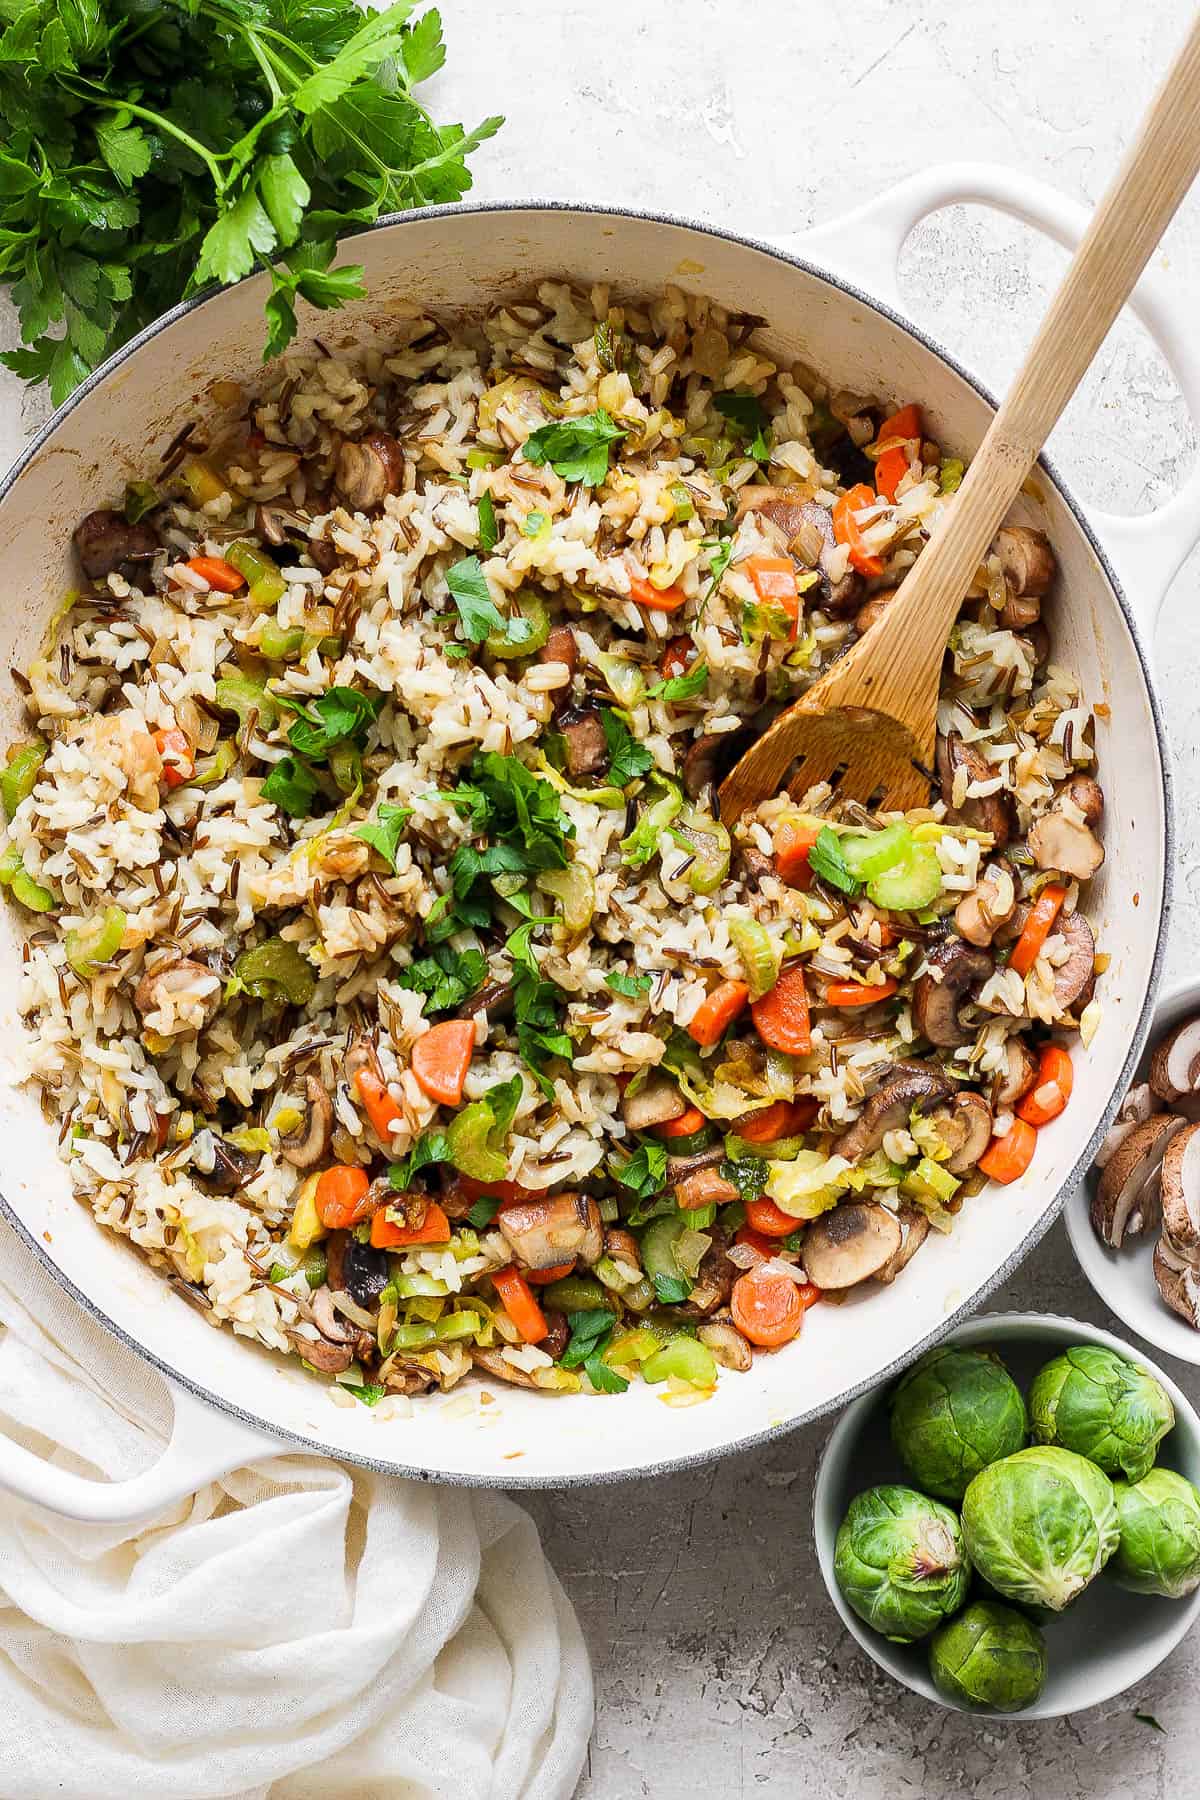 A fully cooked wild rice pilaf in the skillet with a wooden spoon.